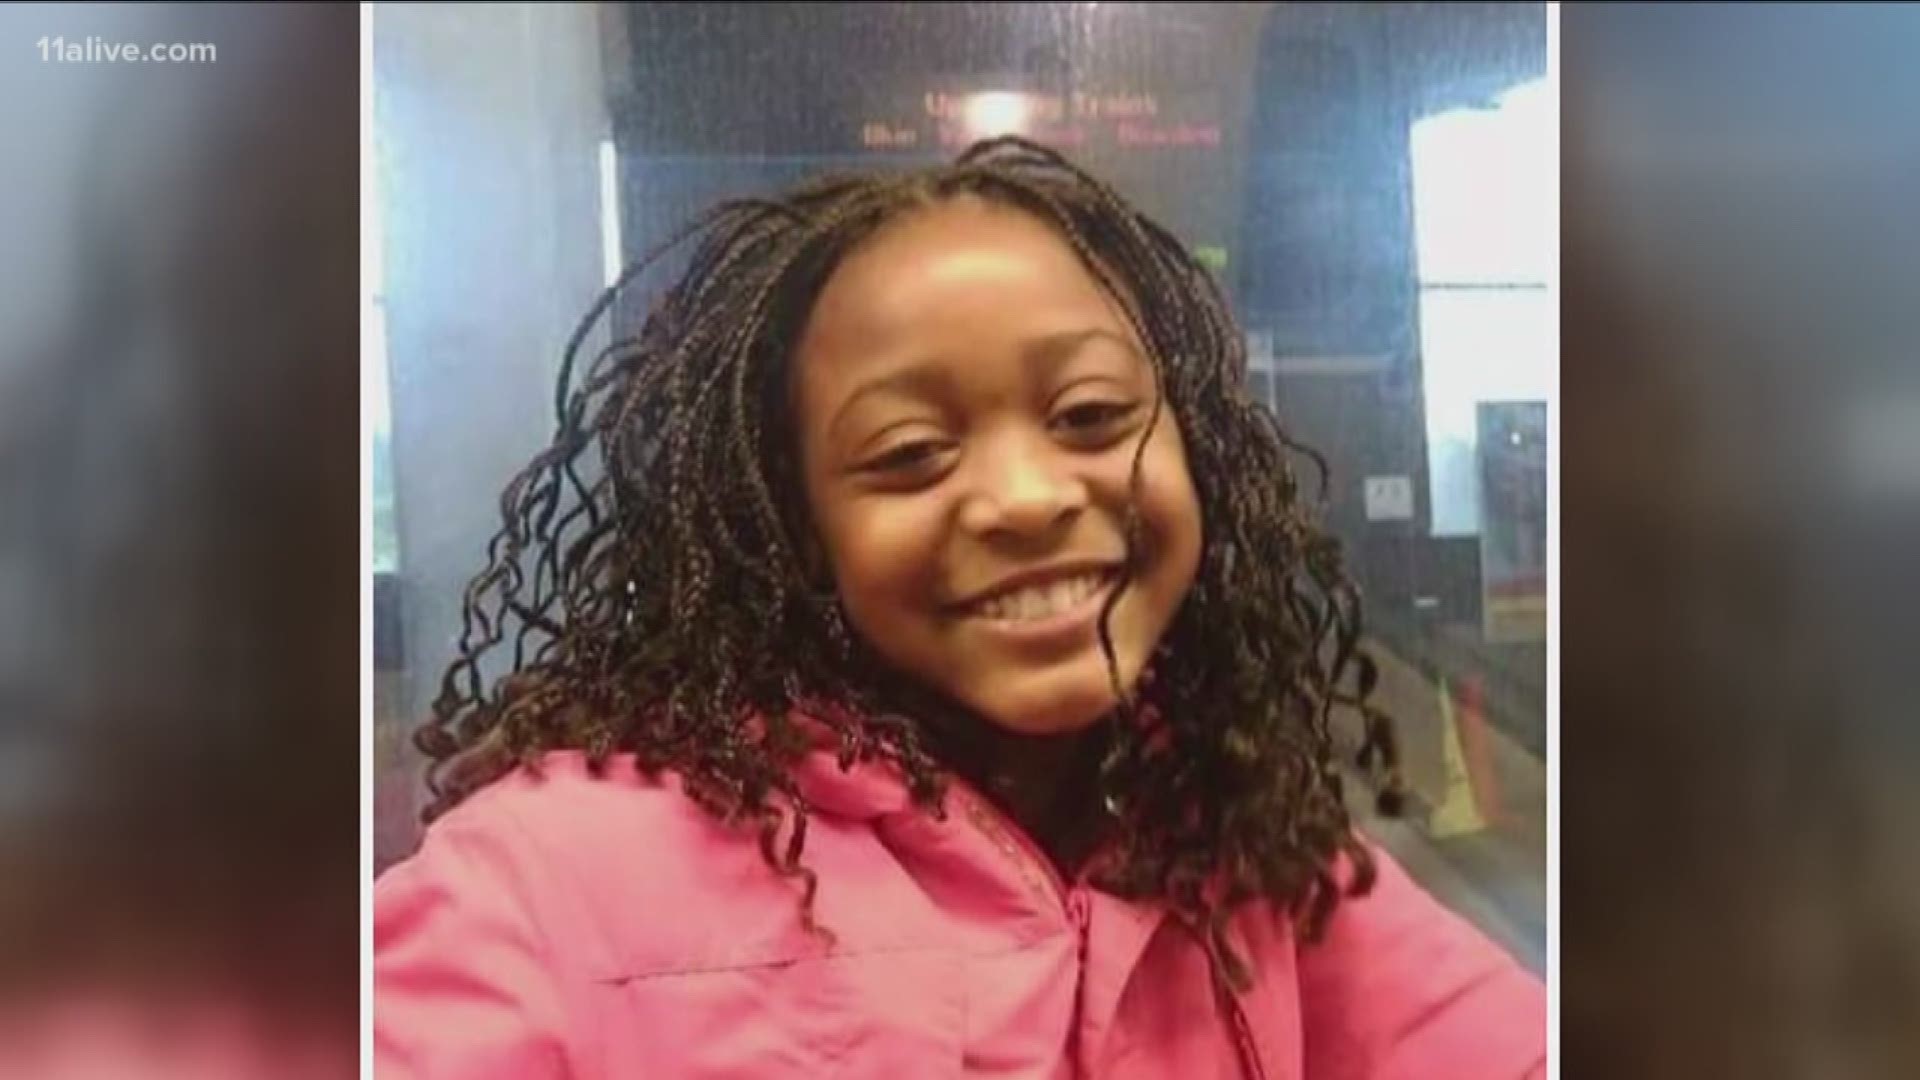 Fourteen-year-old Sonja Harrison was shot through the ceiling last month while babysitting her nephews. Harrison's family says the funeral is set for Saturday, Dec. 8, at noon.